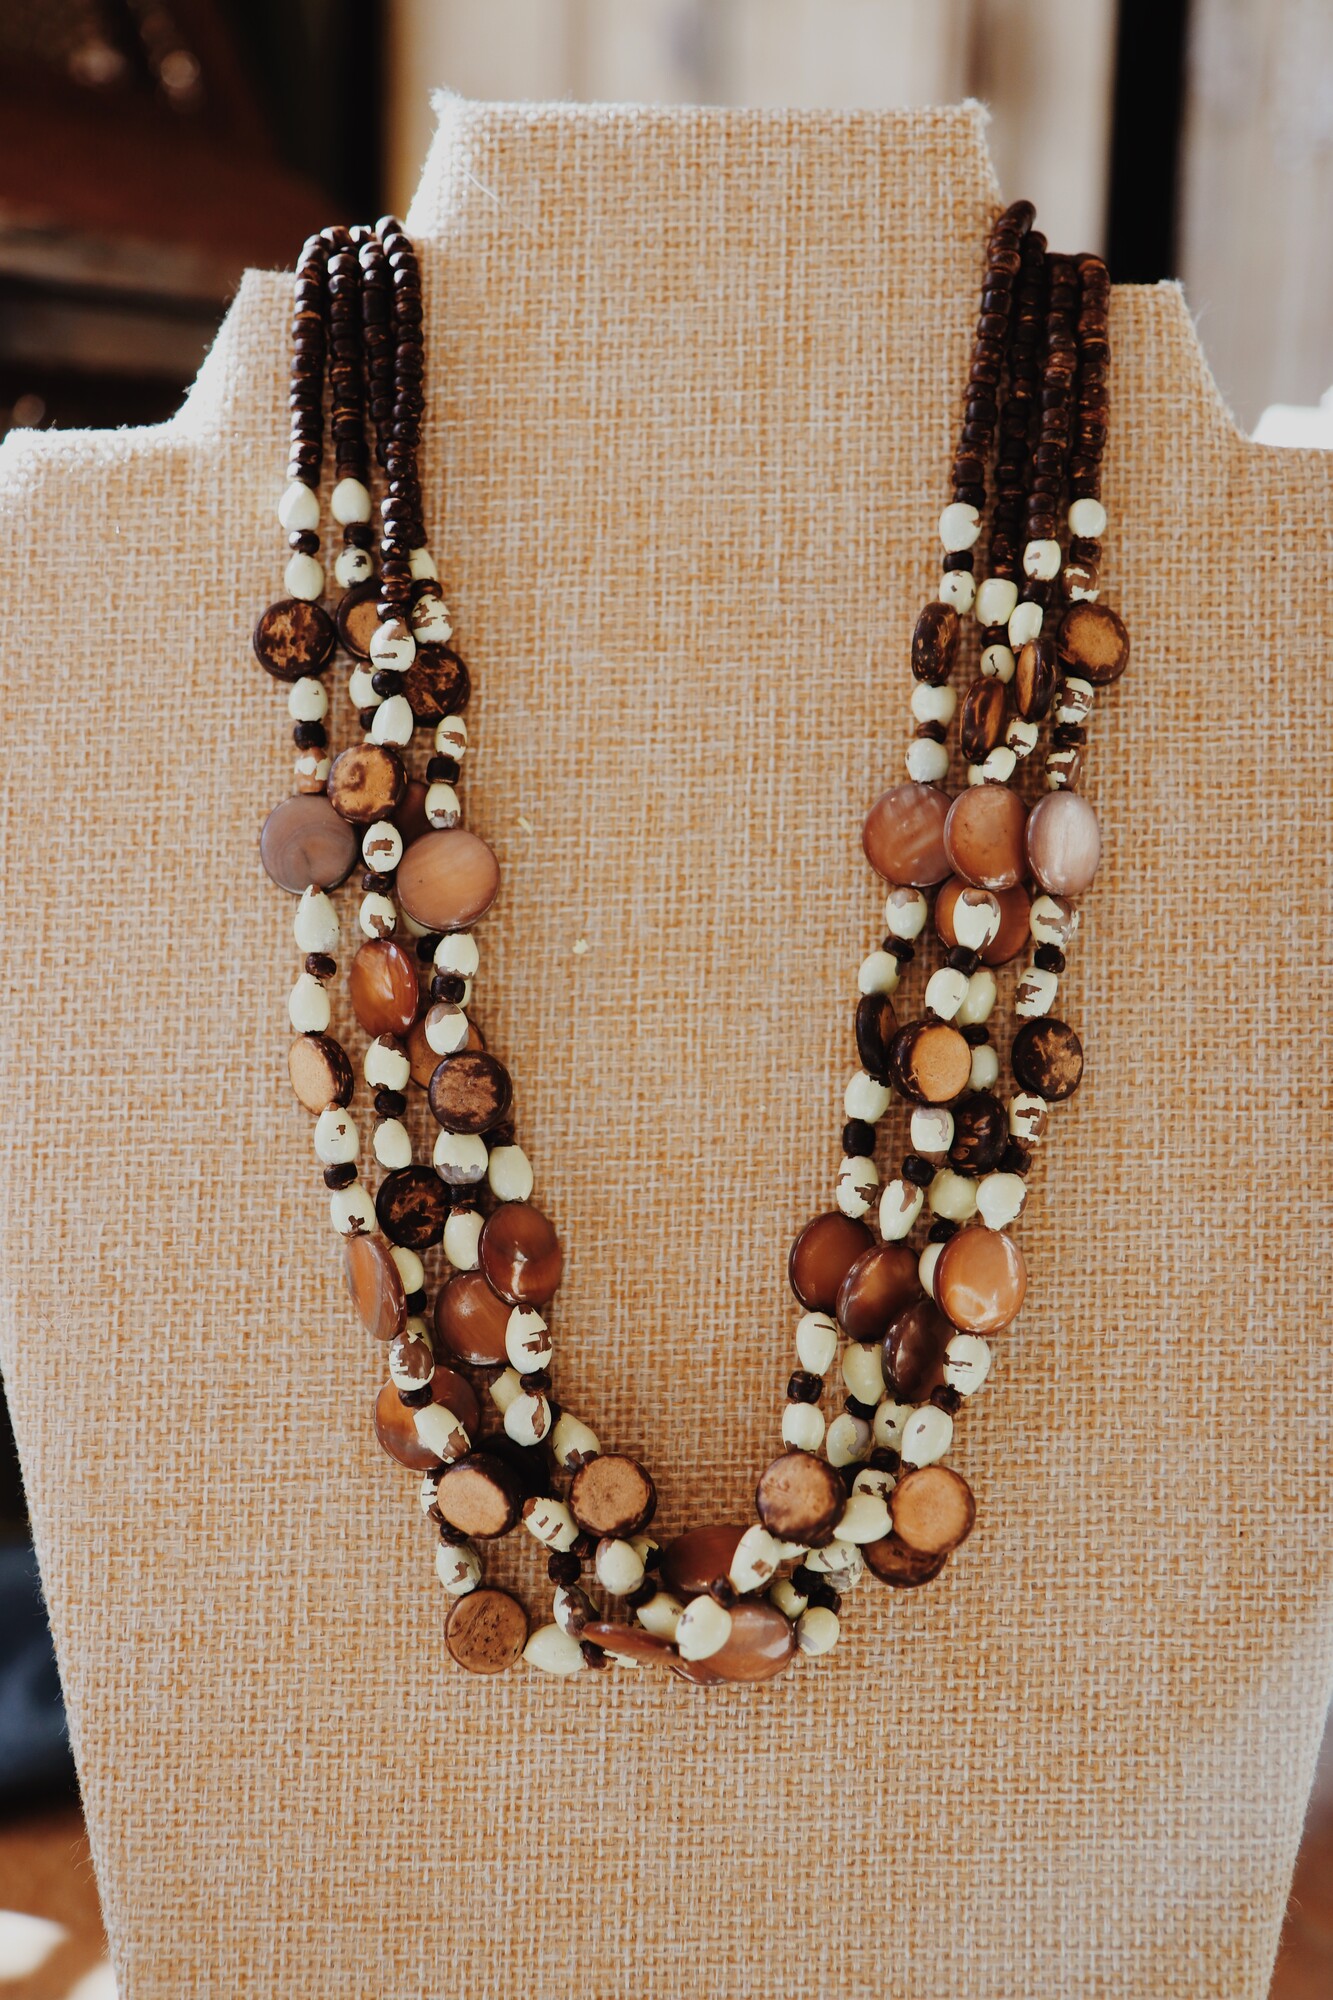 This layered beaded necklace measures 17 inches with a 2 inch extender!